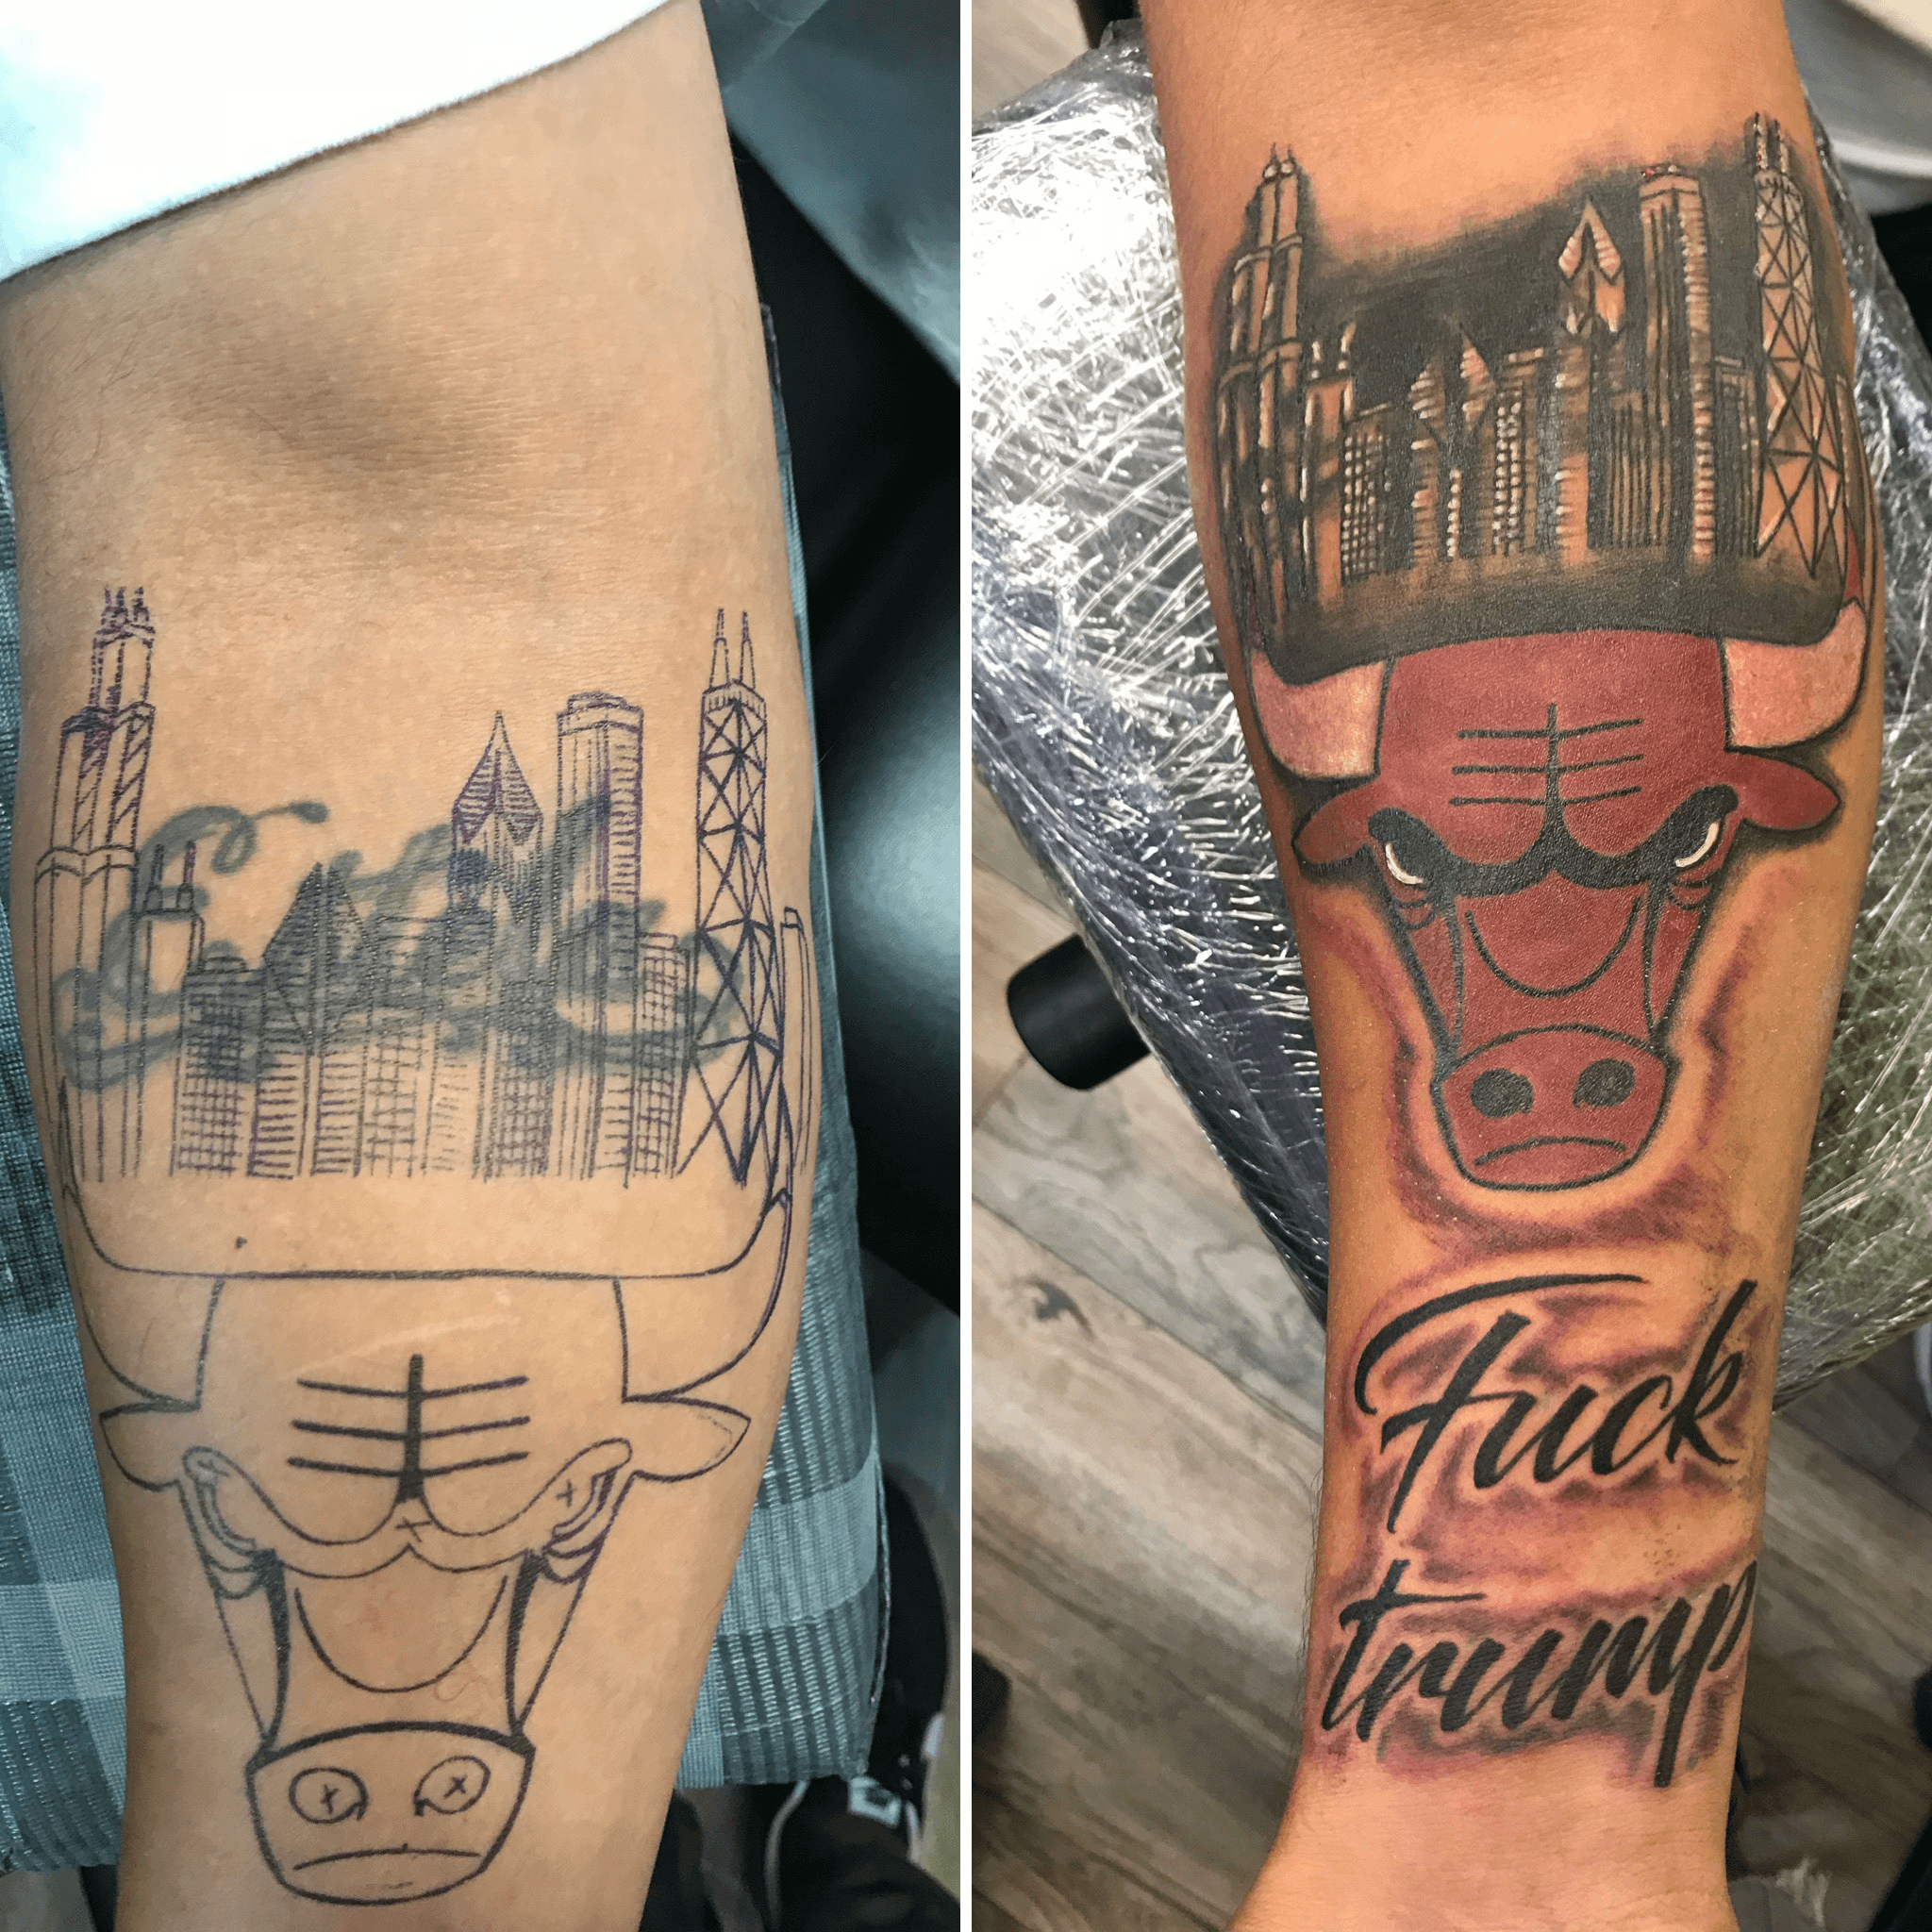 Tattoo done by Mike Boling at Little Chicago in Johnson City TN   rcowboybebop